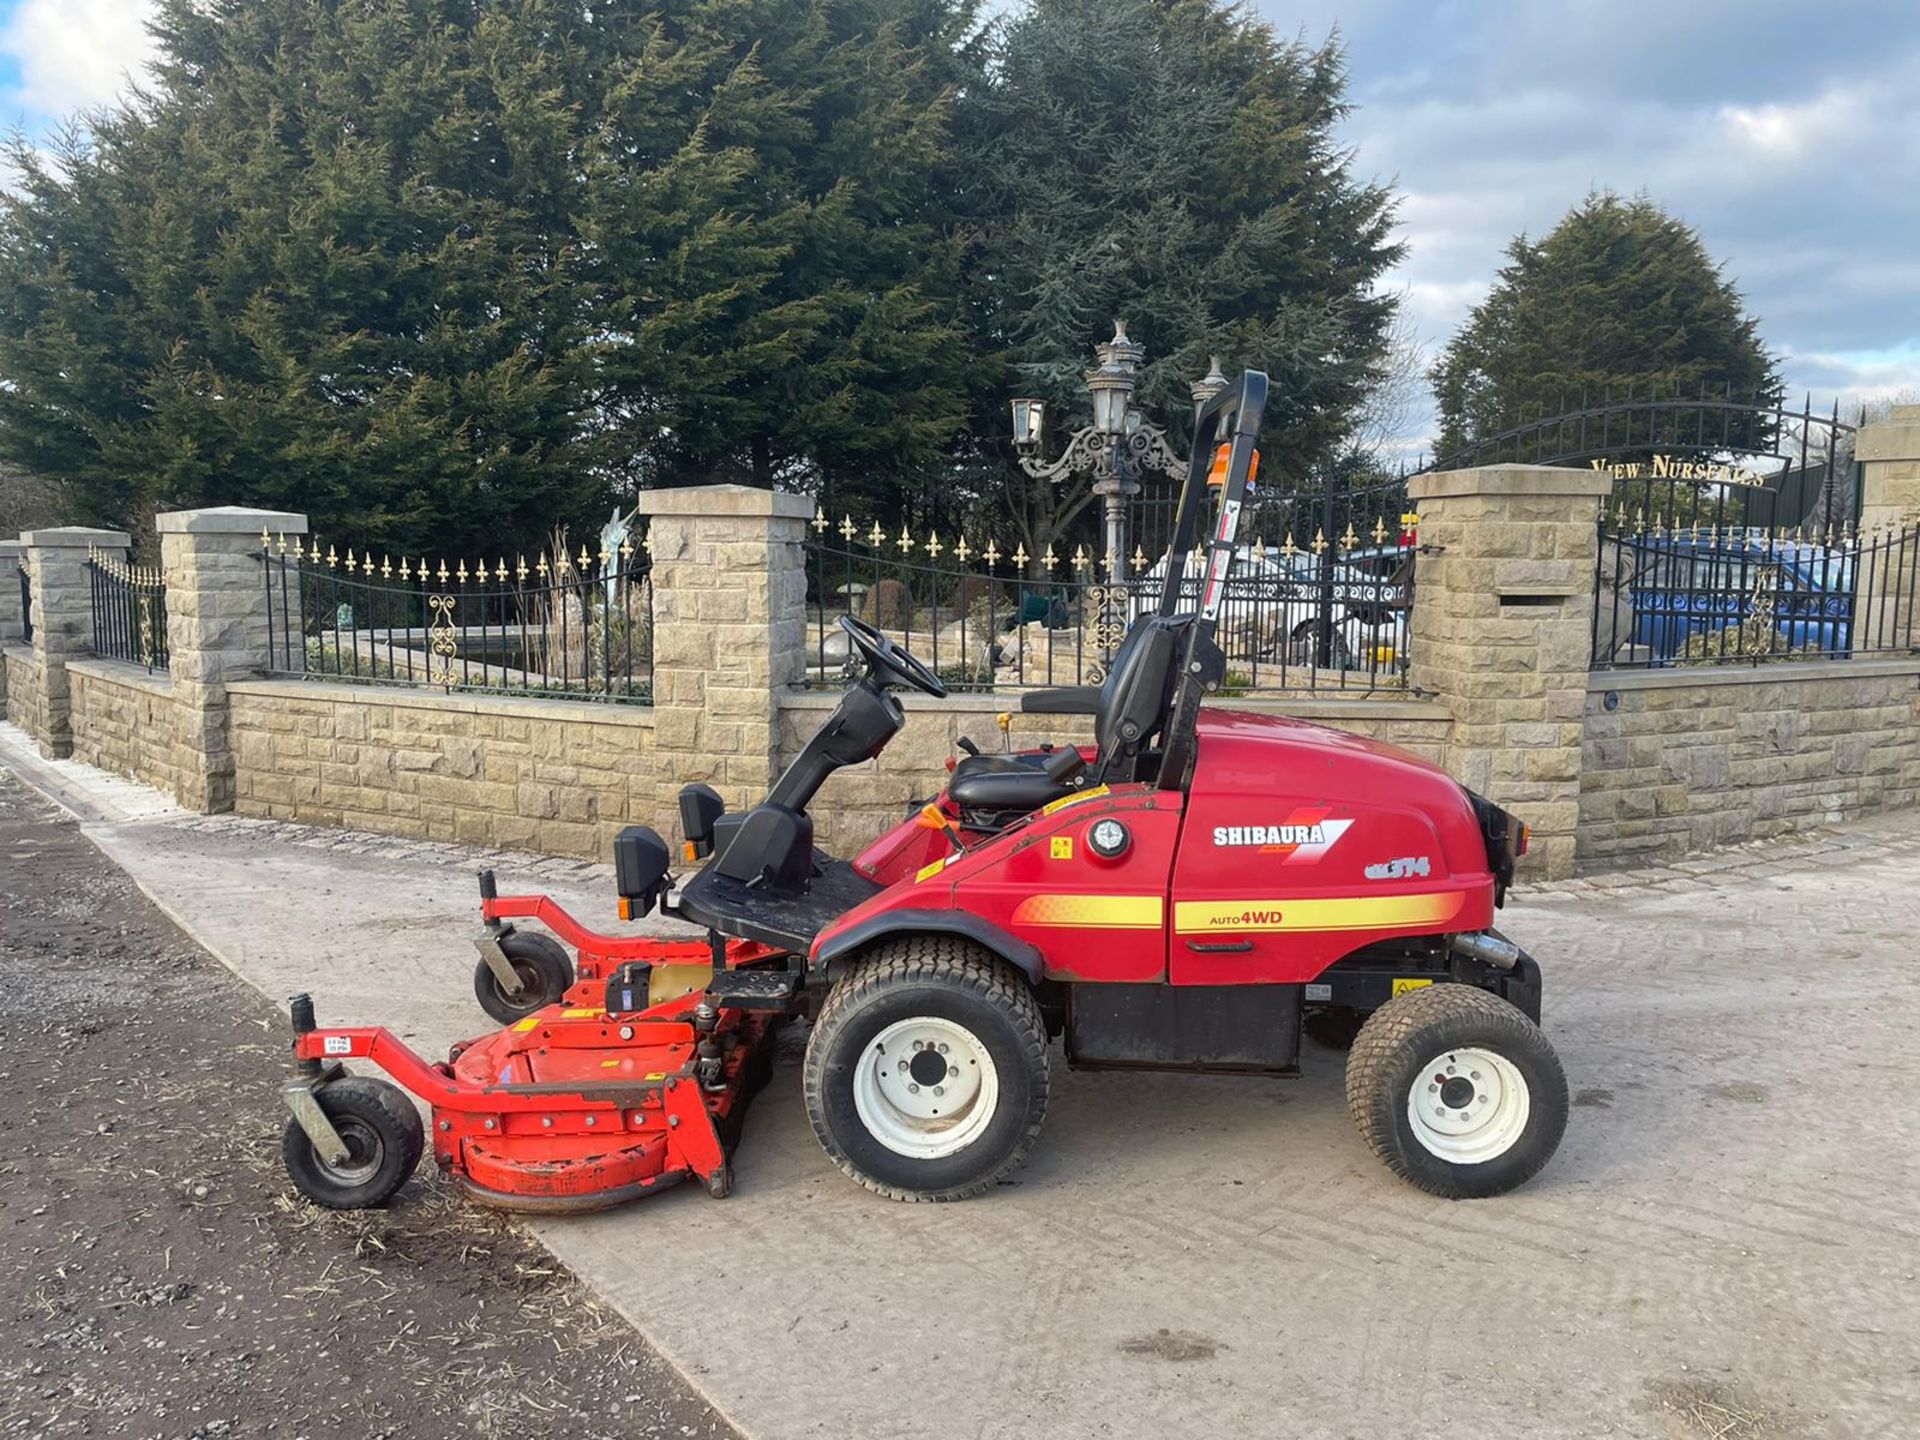 2012 SHIBAURA CM374 OUTFRONT RIDE ON MOWER, RUNS, DRIVES AND CUTS, IN USED BUT GOOD CONDITION